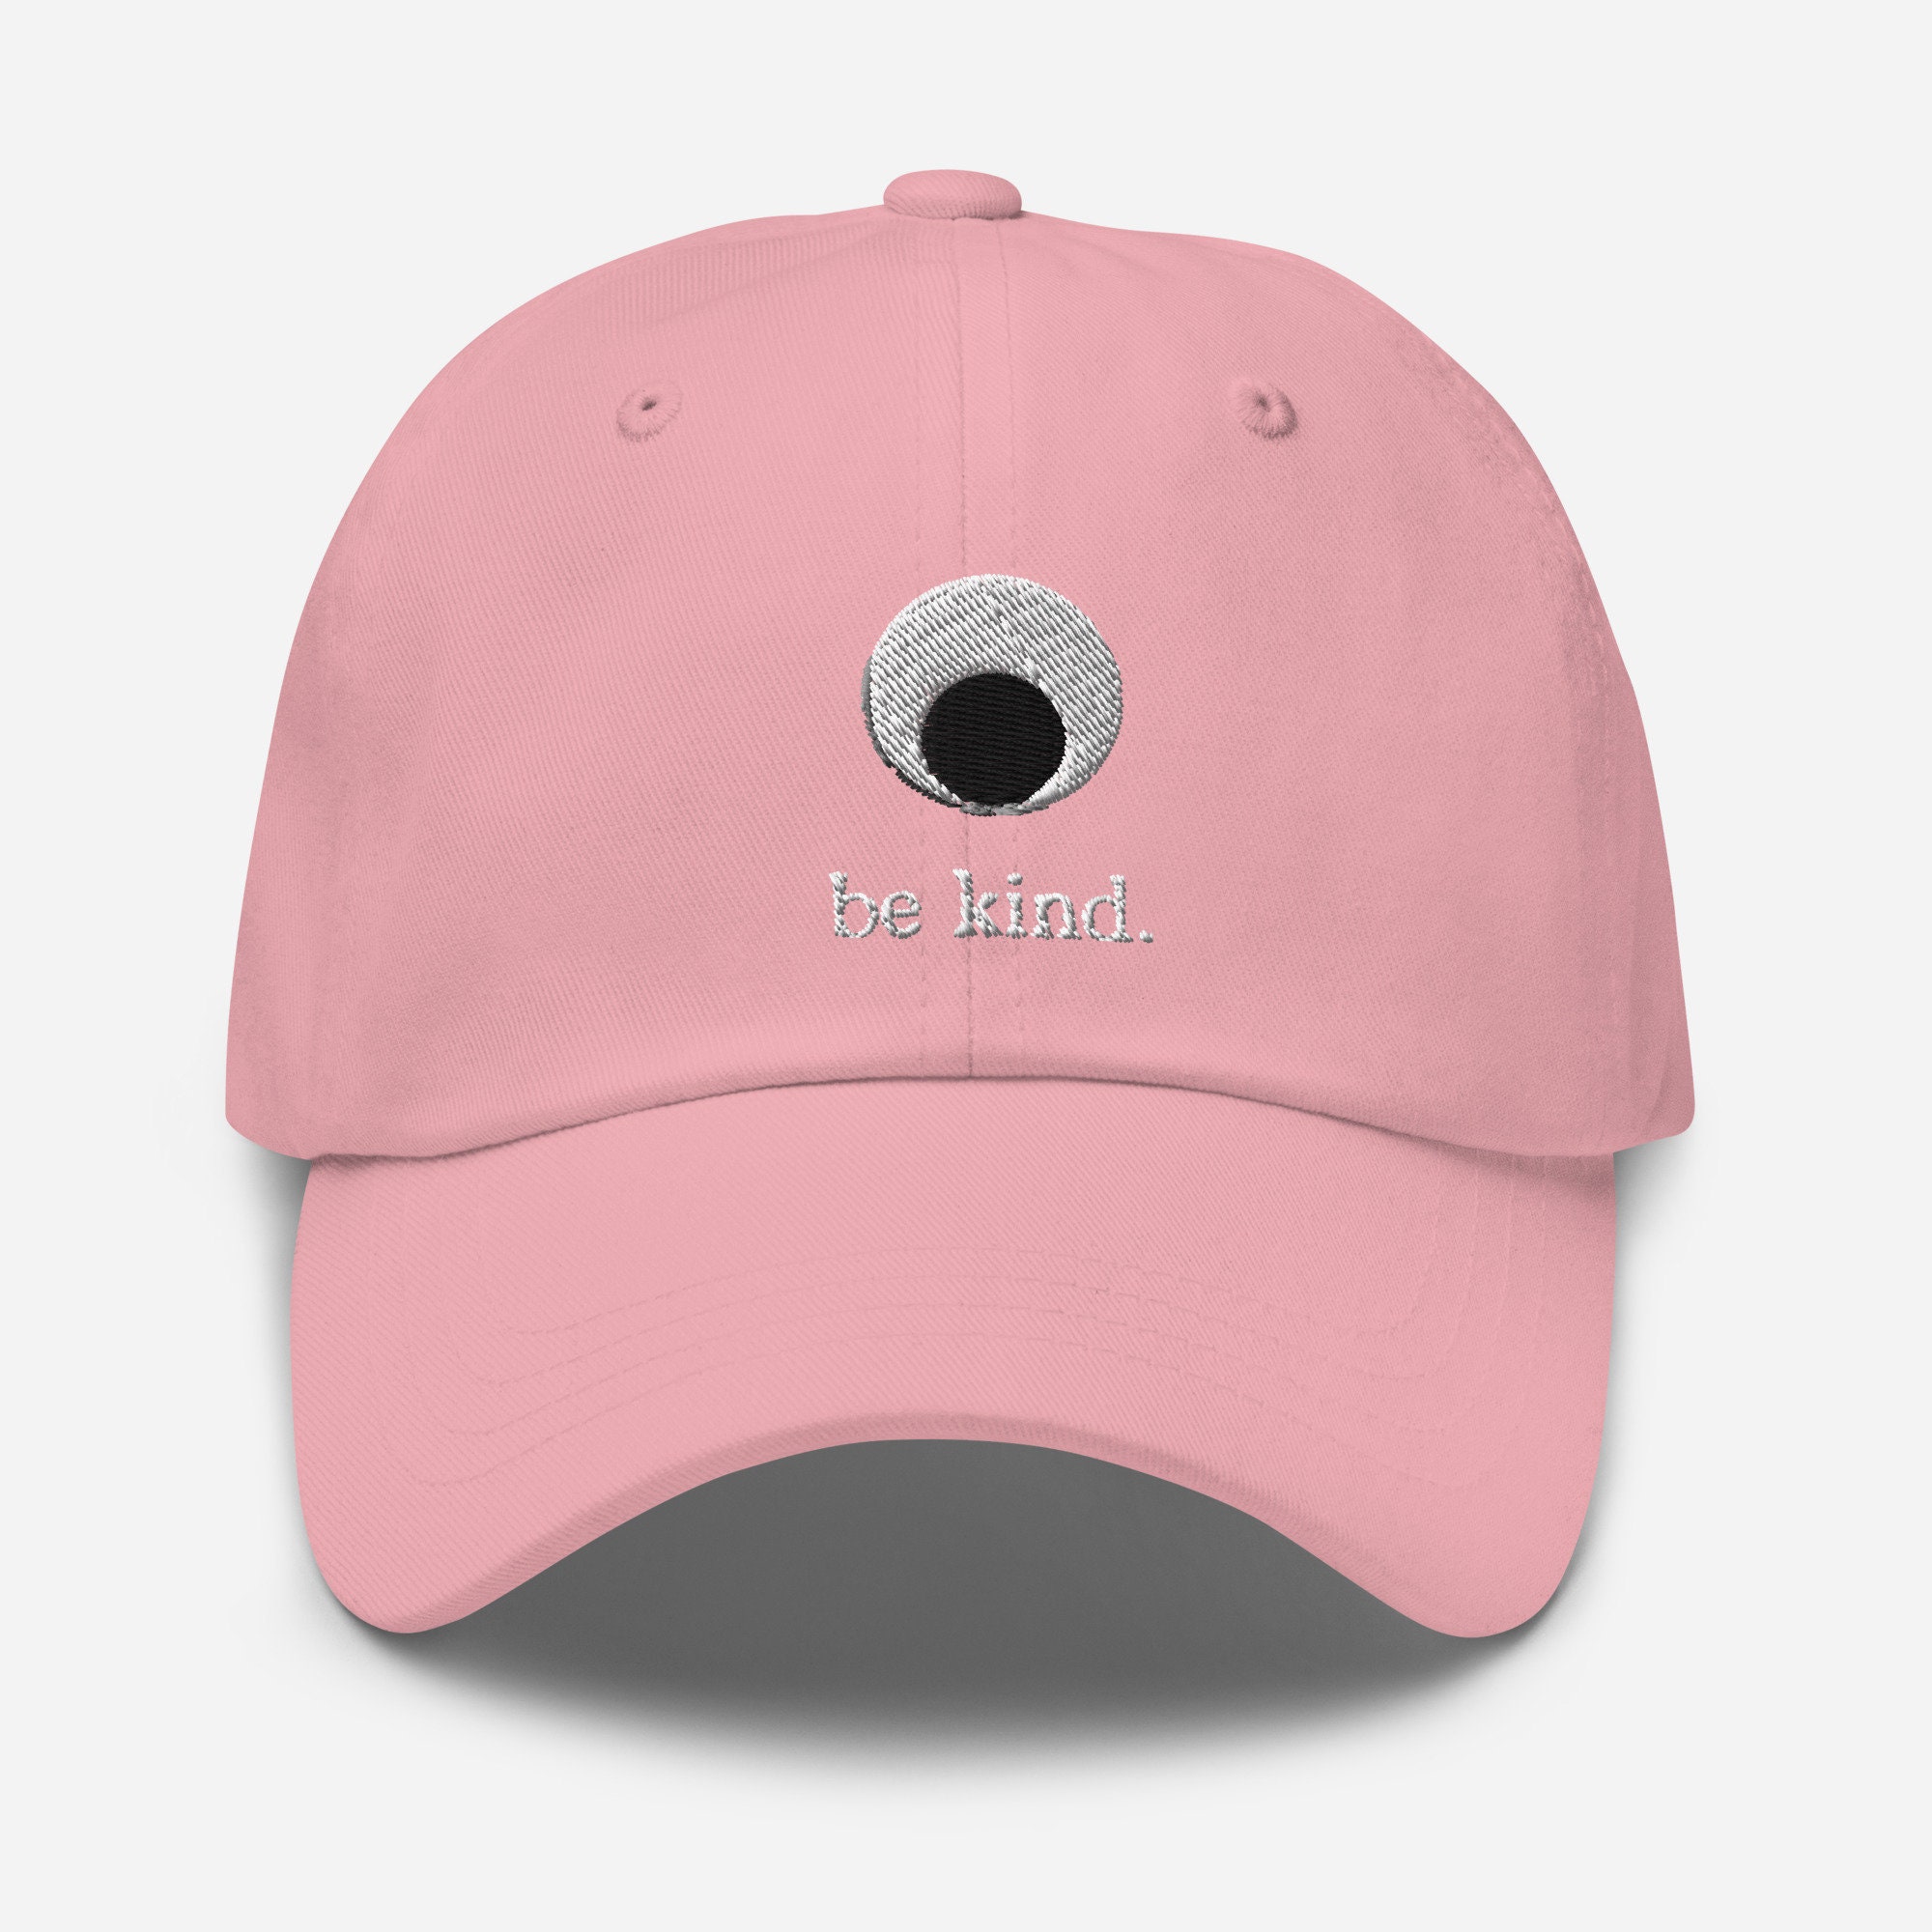 Discover Be Kind Dad Hat - Everything Everywhere All At Once - A24 Film Fans Gift - Minimalist Embroidered  Cotton Hat